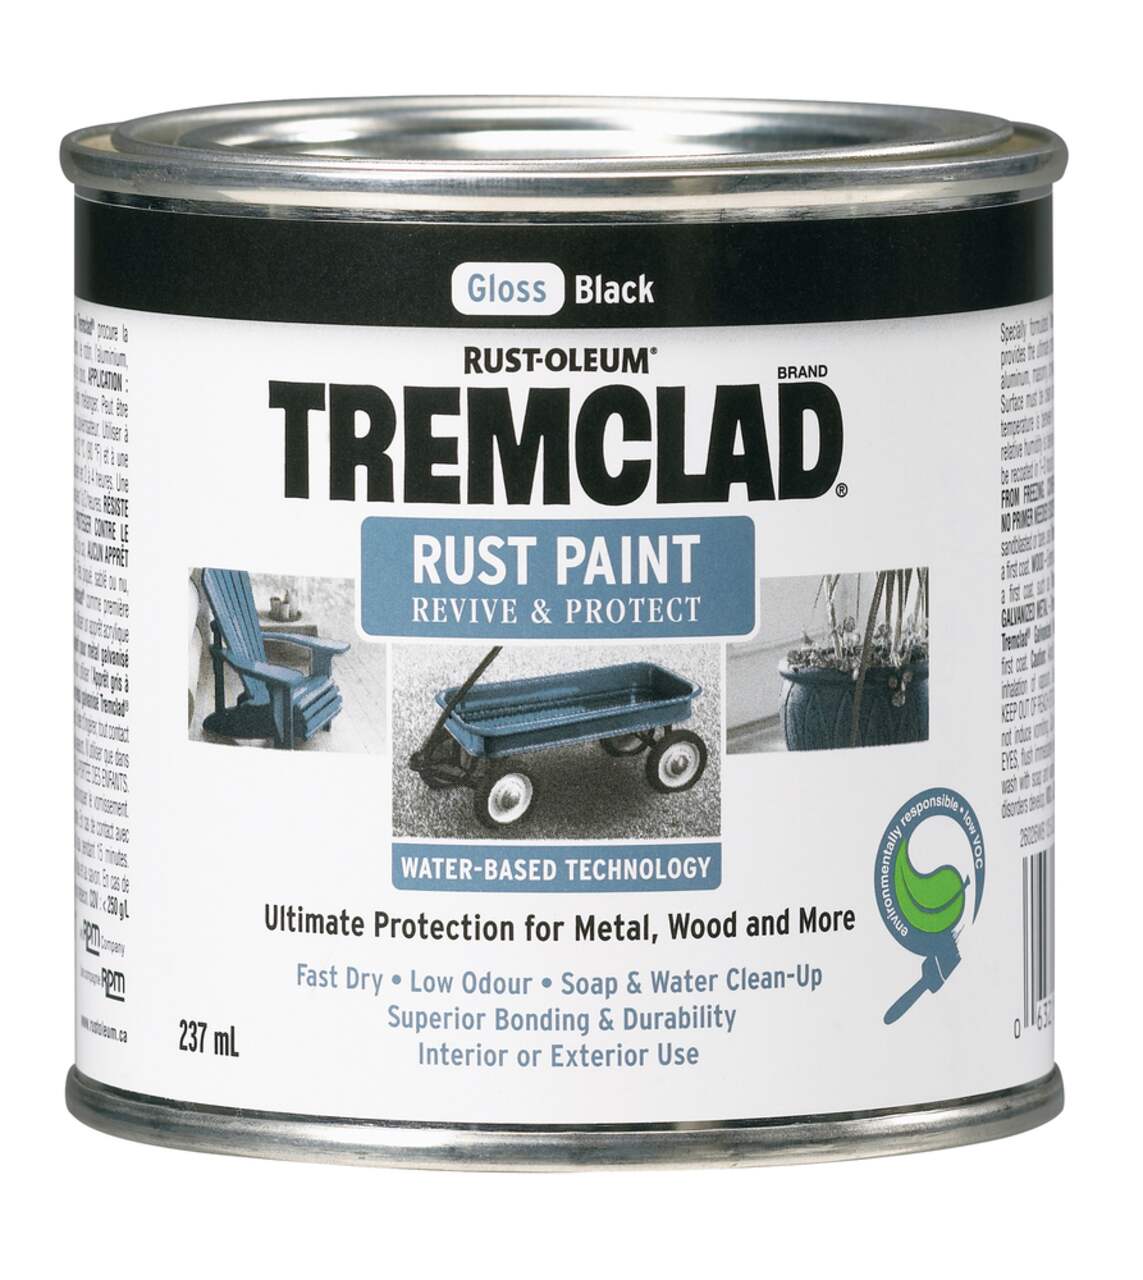 https://media-www.canadiantire.ca/product/fixing/paint/paints/0489200/recoded-to-8994565-764a748f-c362-4d0c-a3bd-614e87a6c59a.png?imdensity=1&imwidth=640&impolicy=mZoom